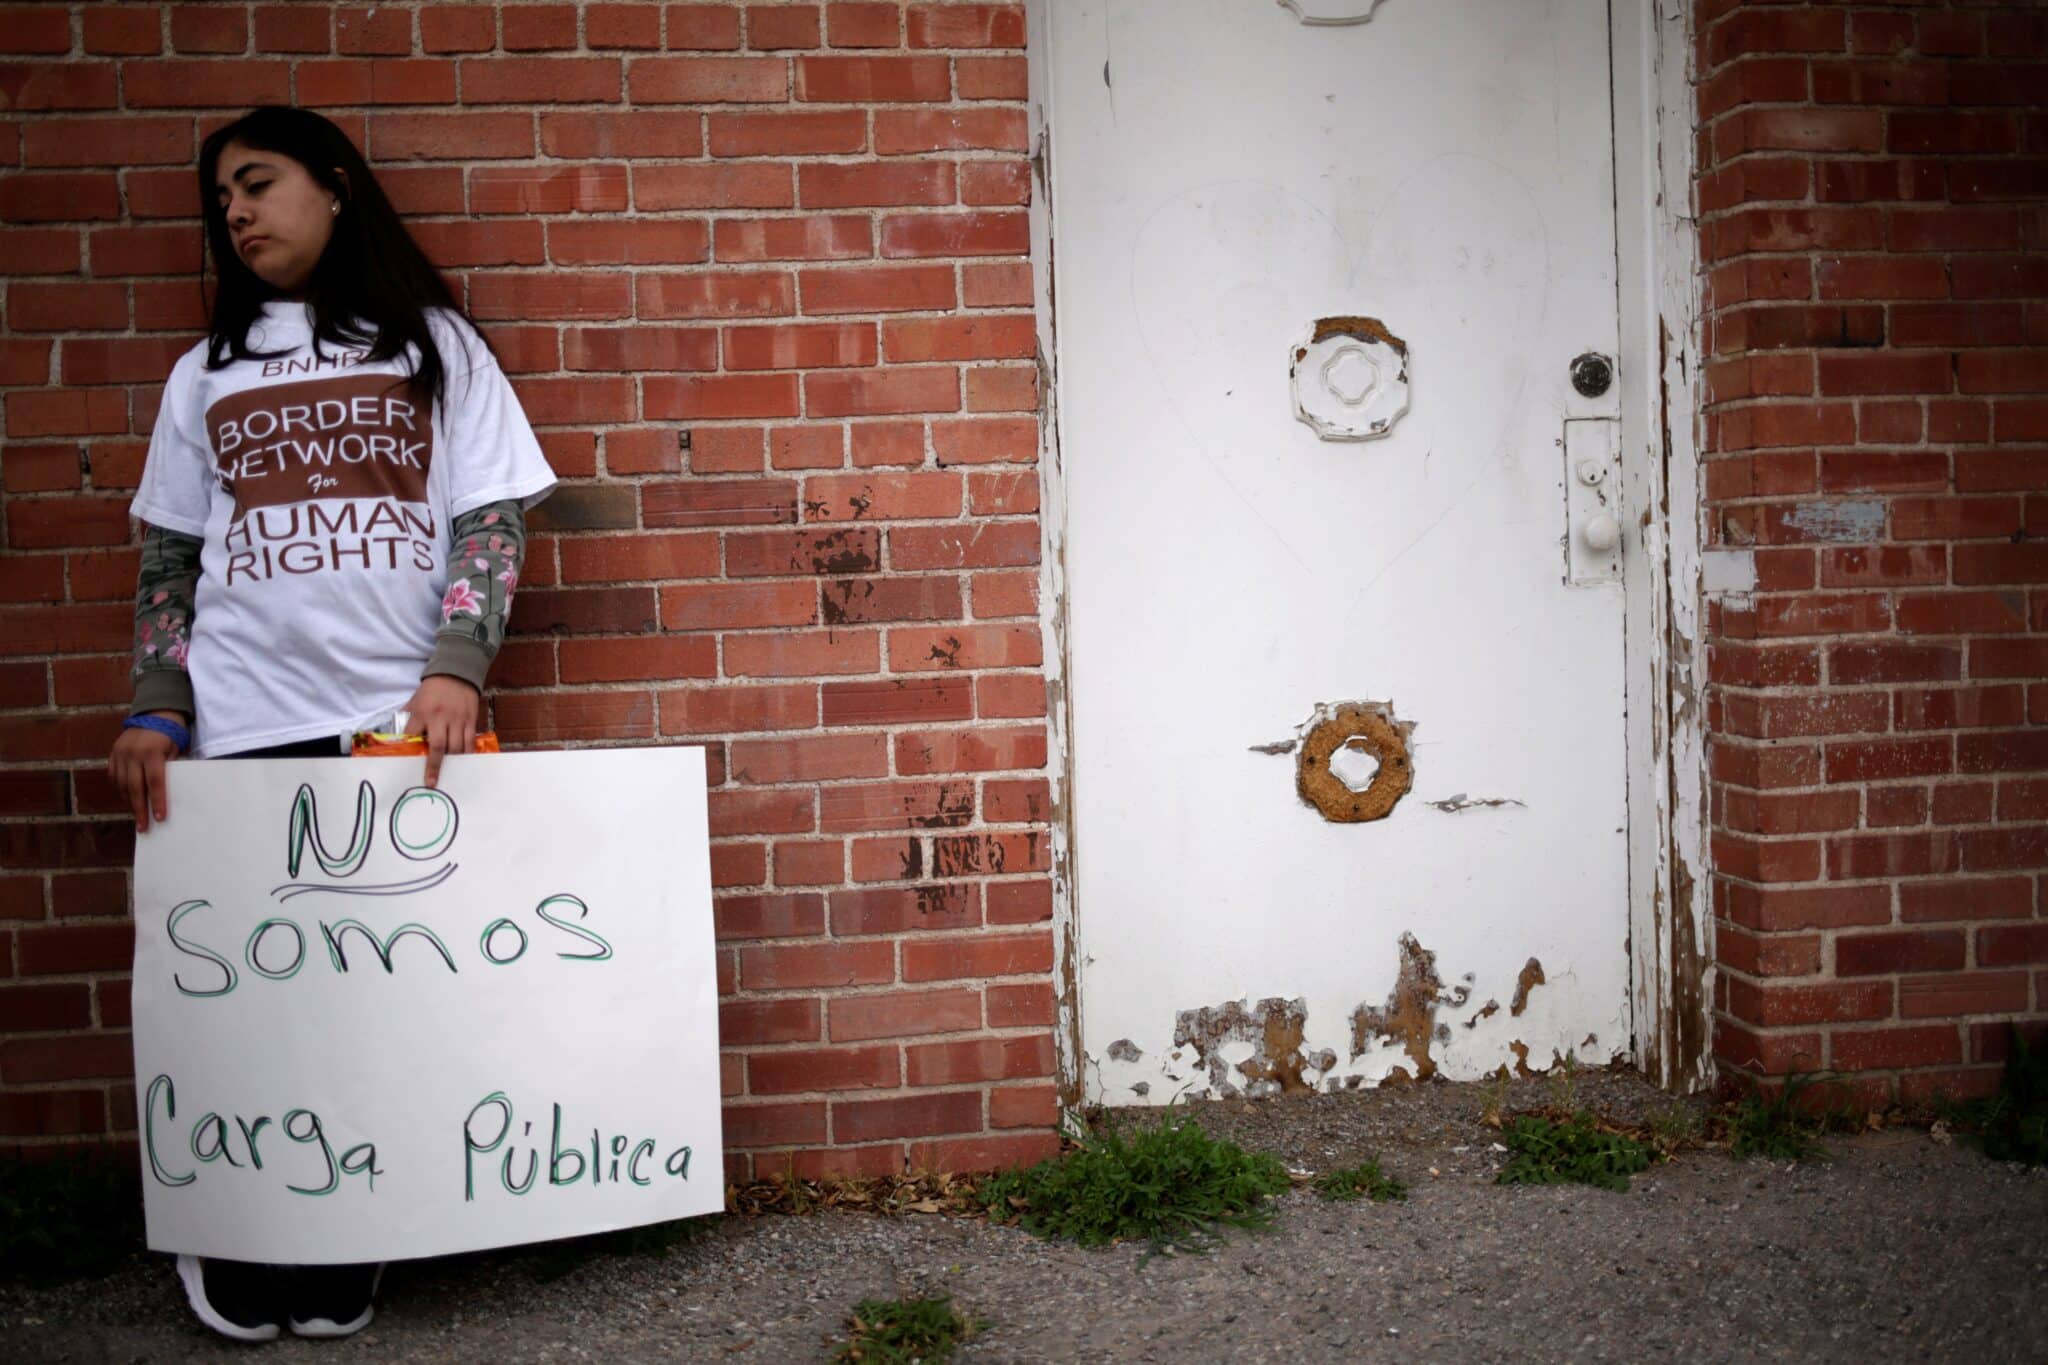 An young activist takes part in a vigil against alleged abuses by the U.S. Border Patrol outside of the Annunciation House migrant shelter in El Paso, Texas, Feb. 22, 2020. She holds a sign in Spanish that translates into English as "We are not a public charge." (OSV News photo/Jose Luis Gonzalez, Reuters)